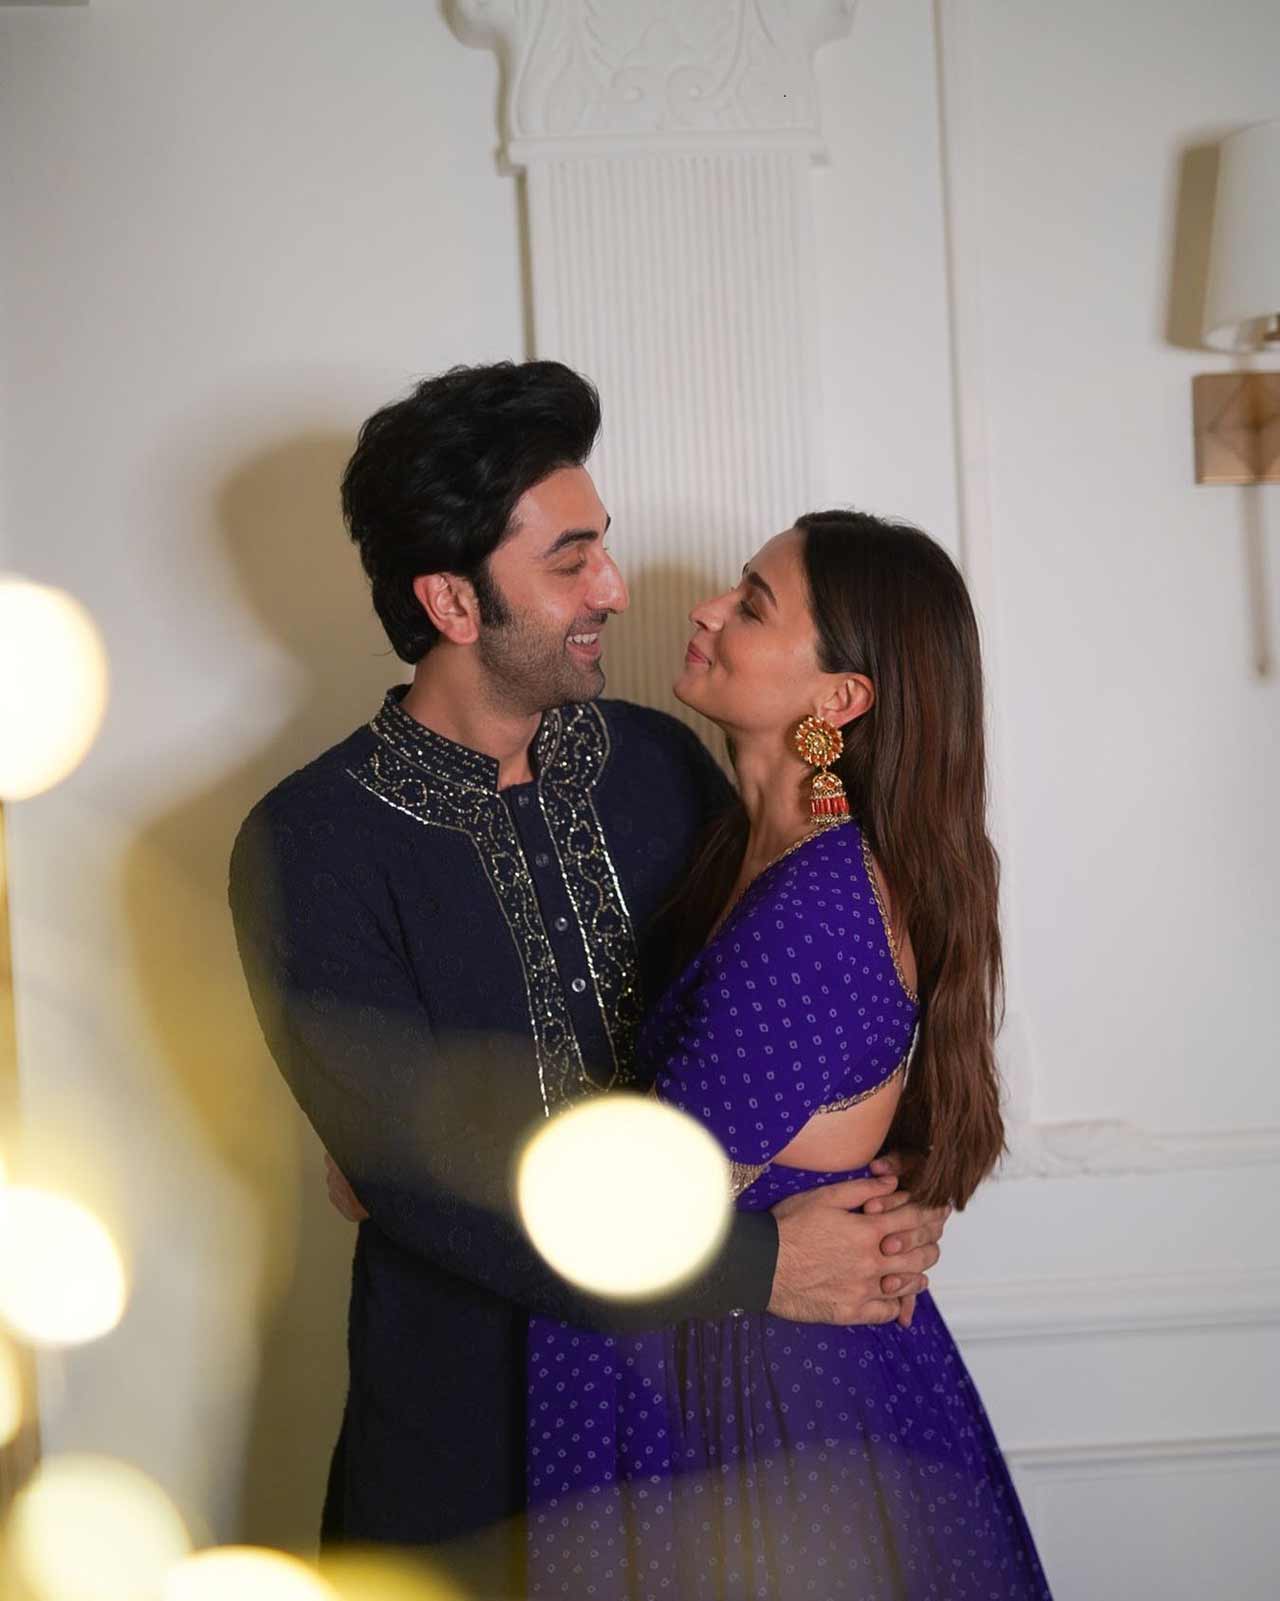 Alia and Ranbir's wedding was an intimate affair with only close friends and family members in the attendance